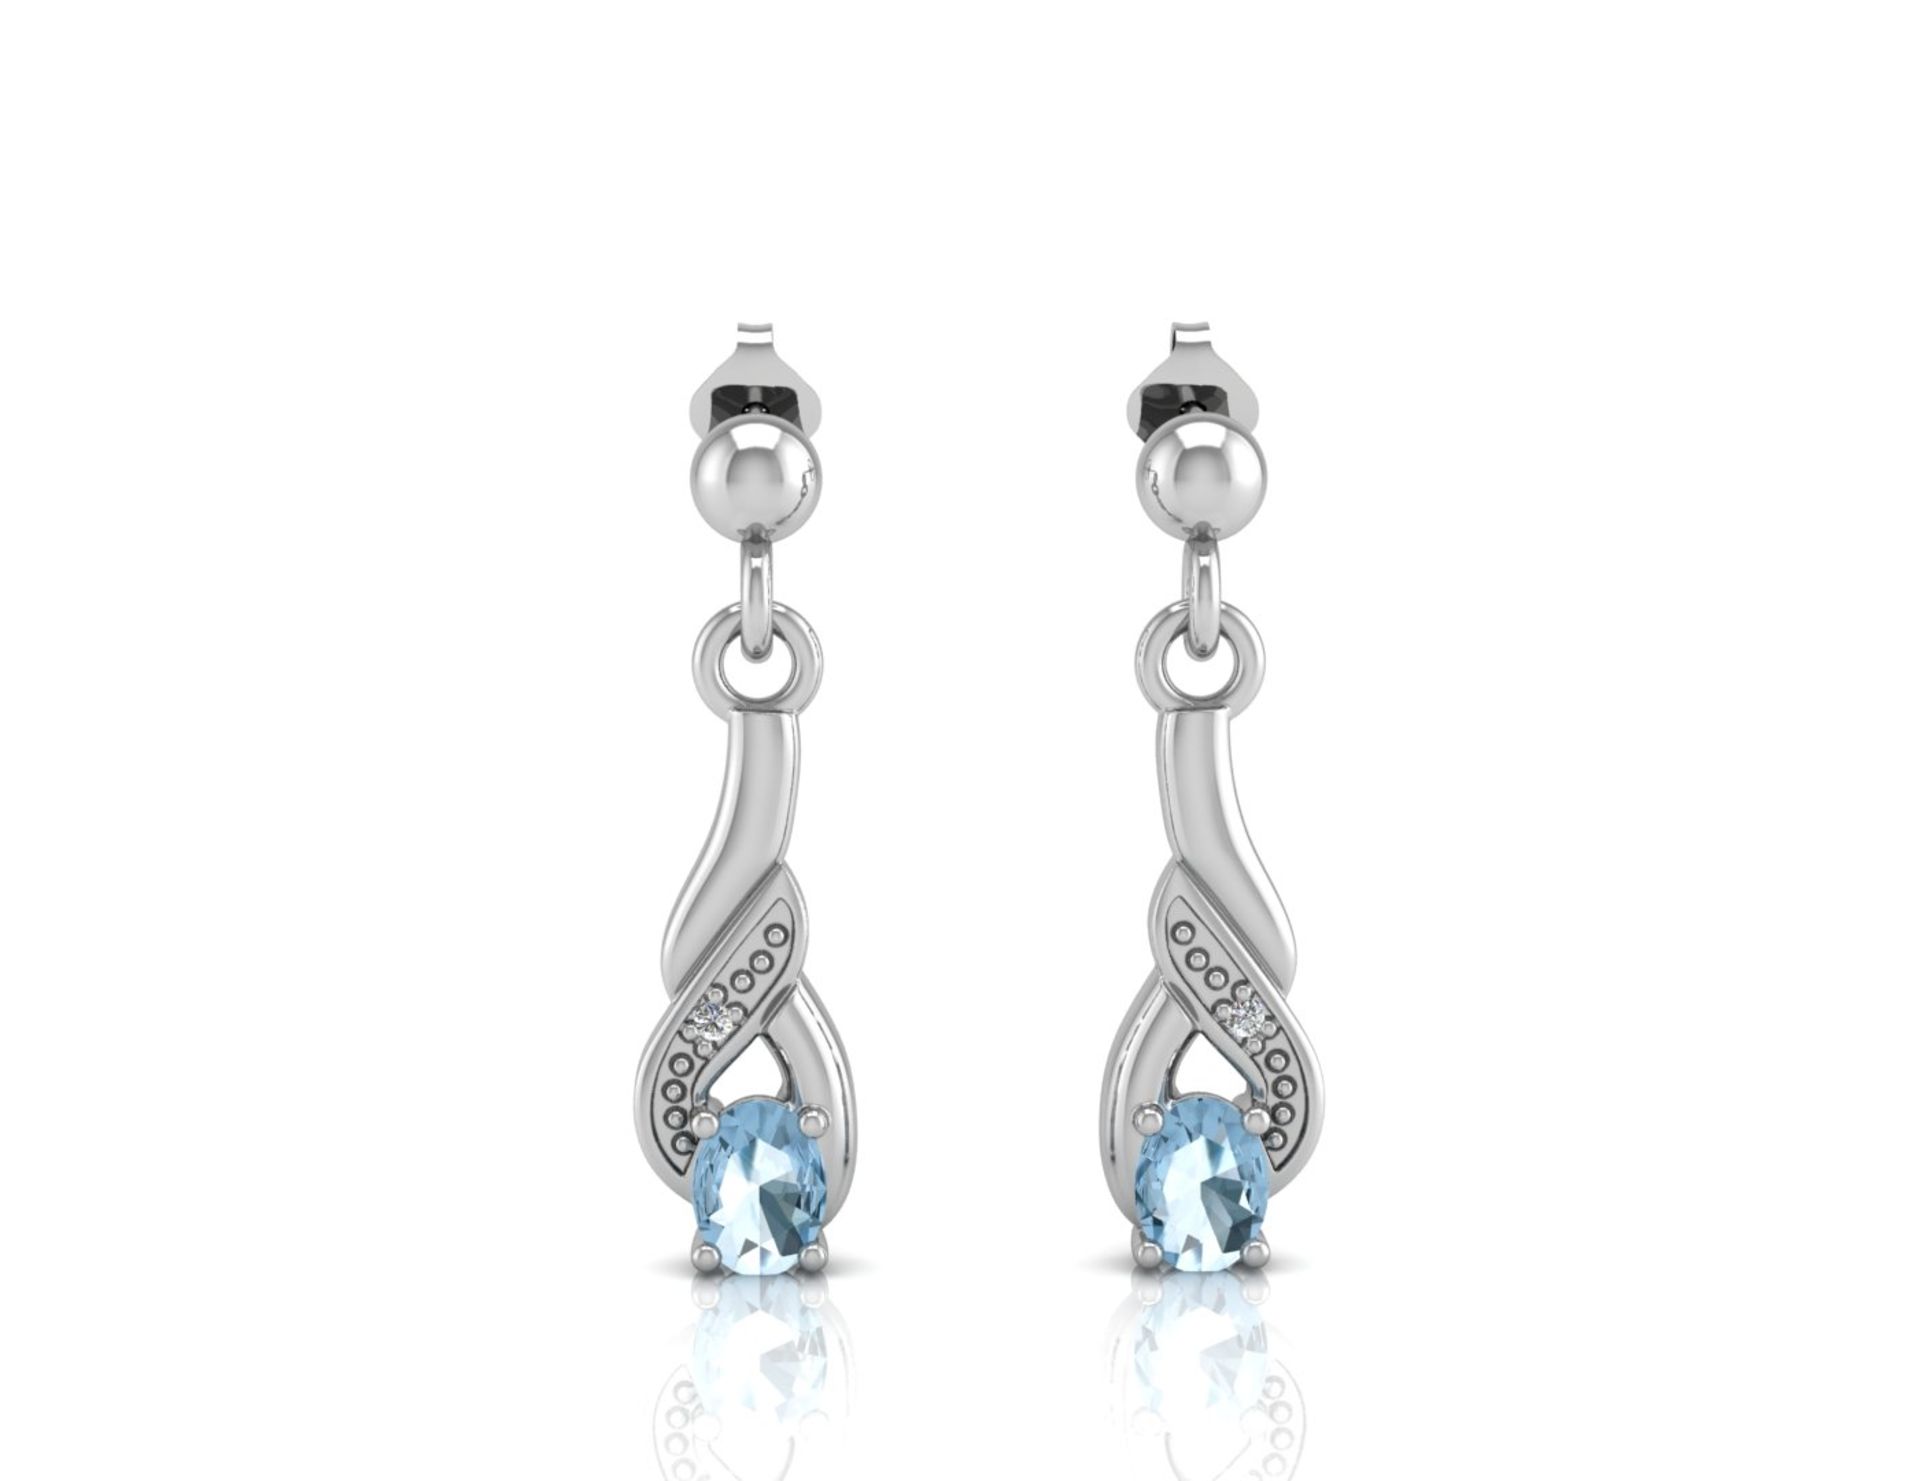 9ct White Gold Diamond And Blue Topaz Earring 0.01 Carats - Valued by AGI £260.00 - A gorgeous - Image 3 of 3